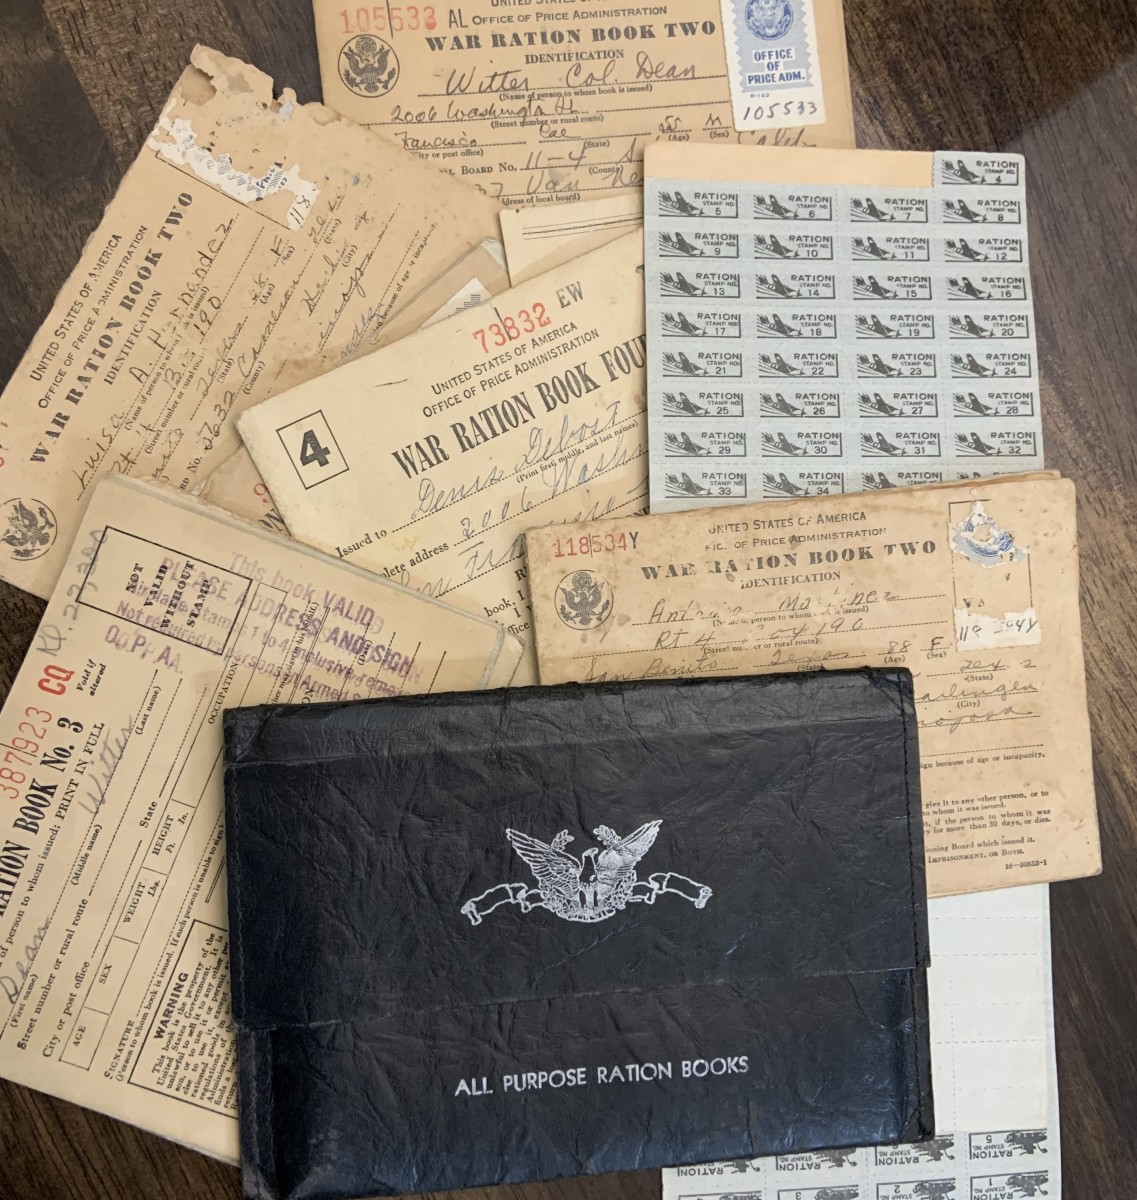 World War II rationing books from the Office of Price Administration.